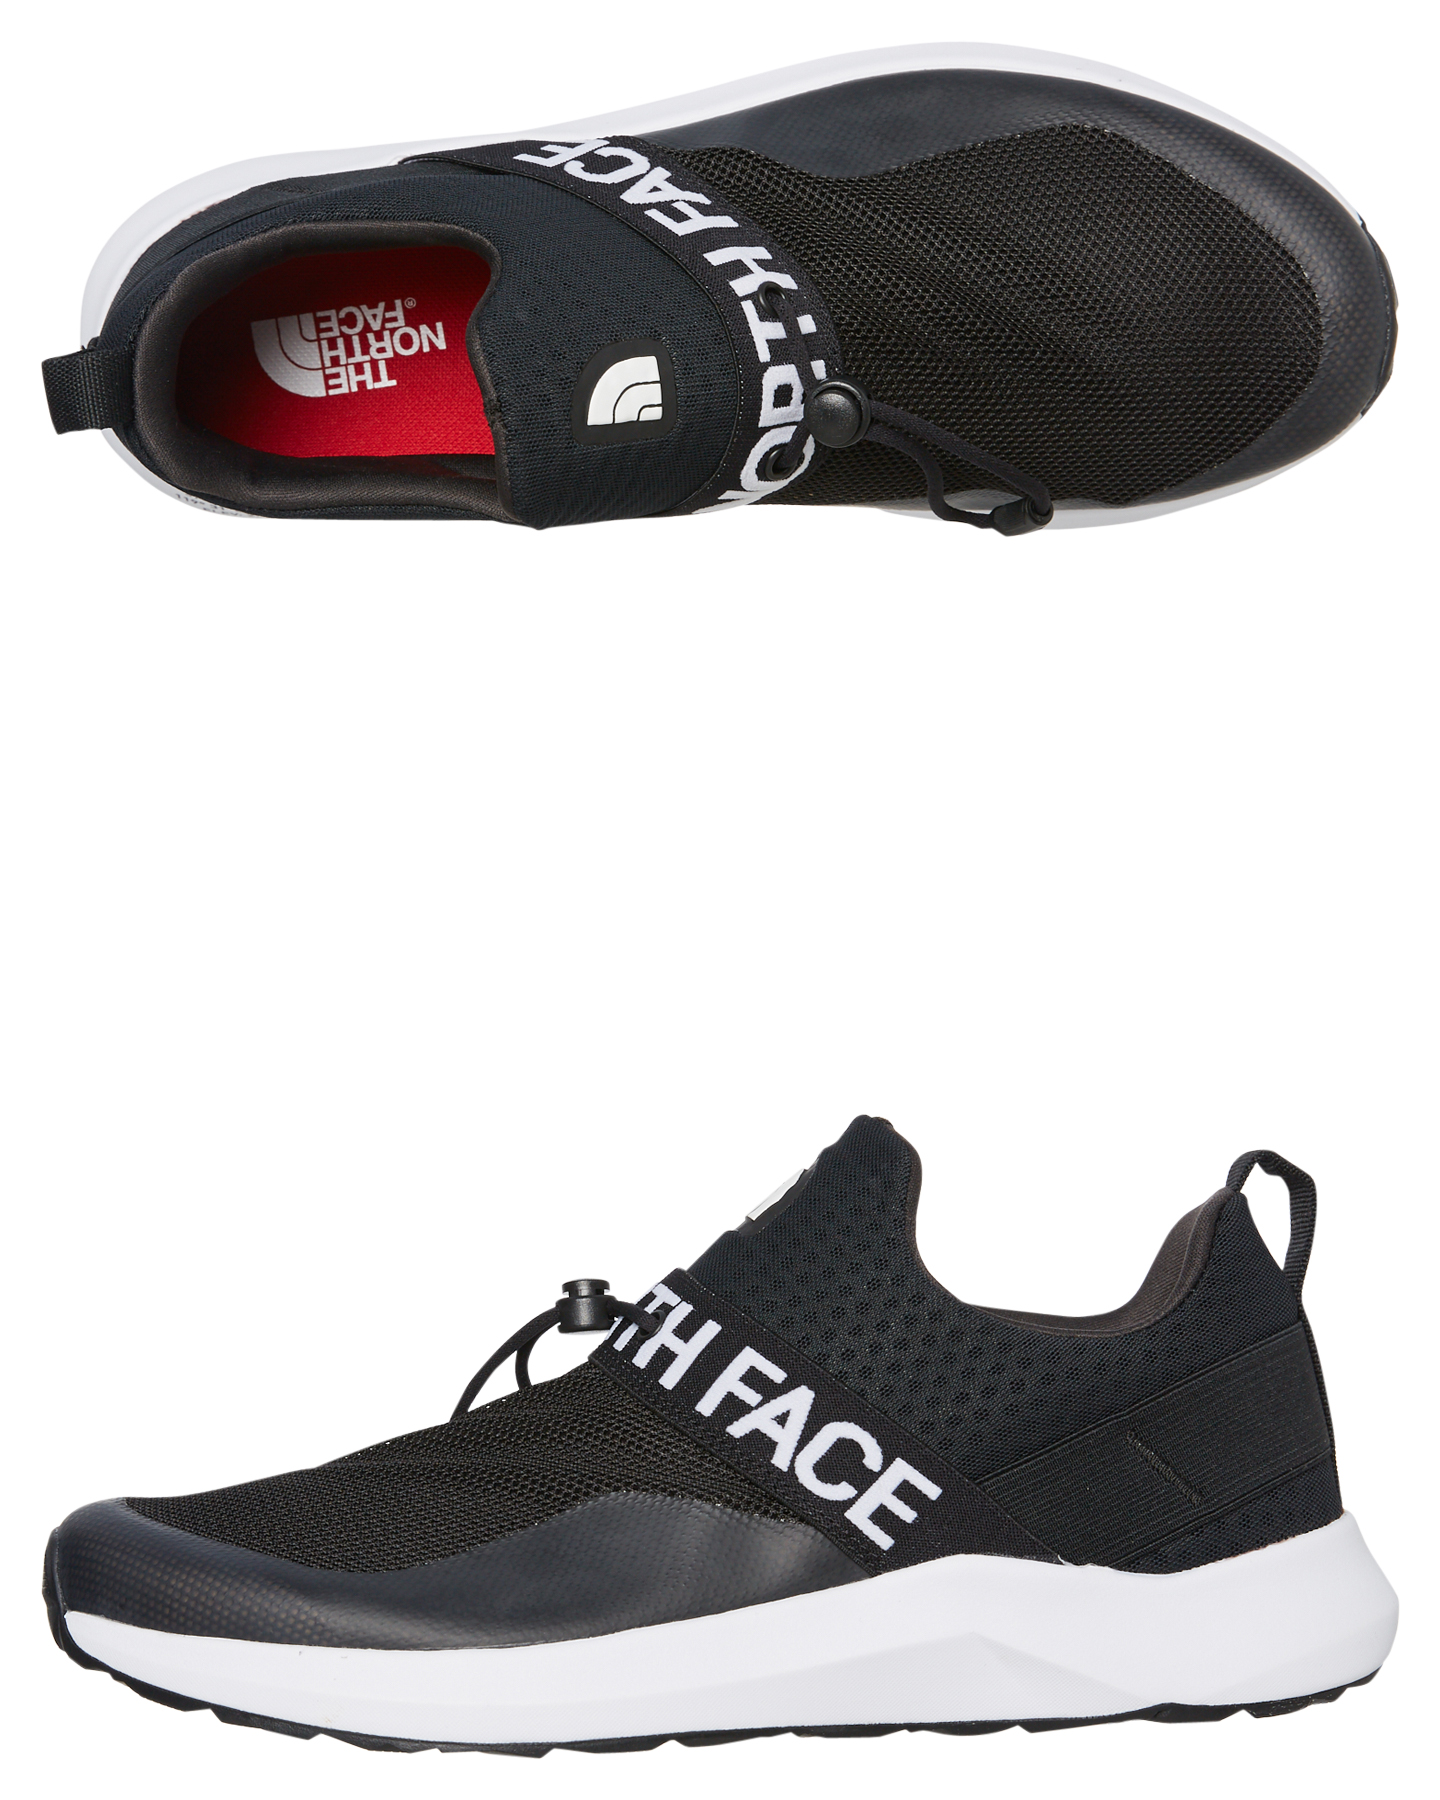 north face gym shoes